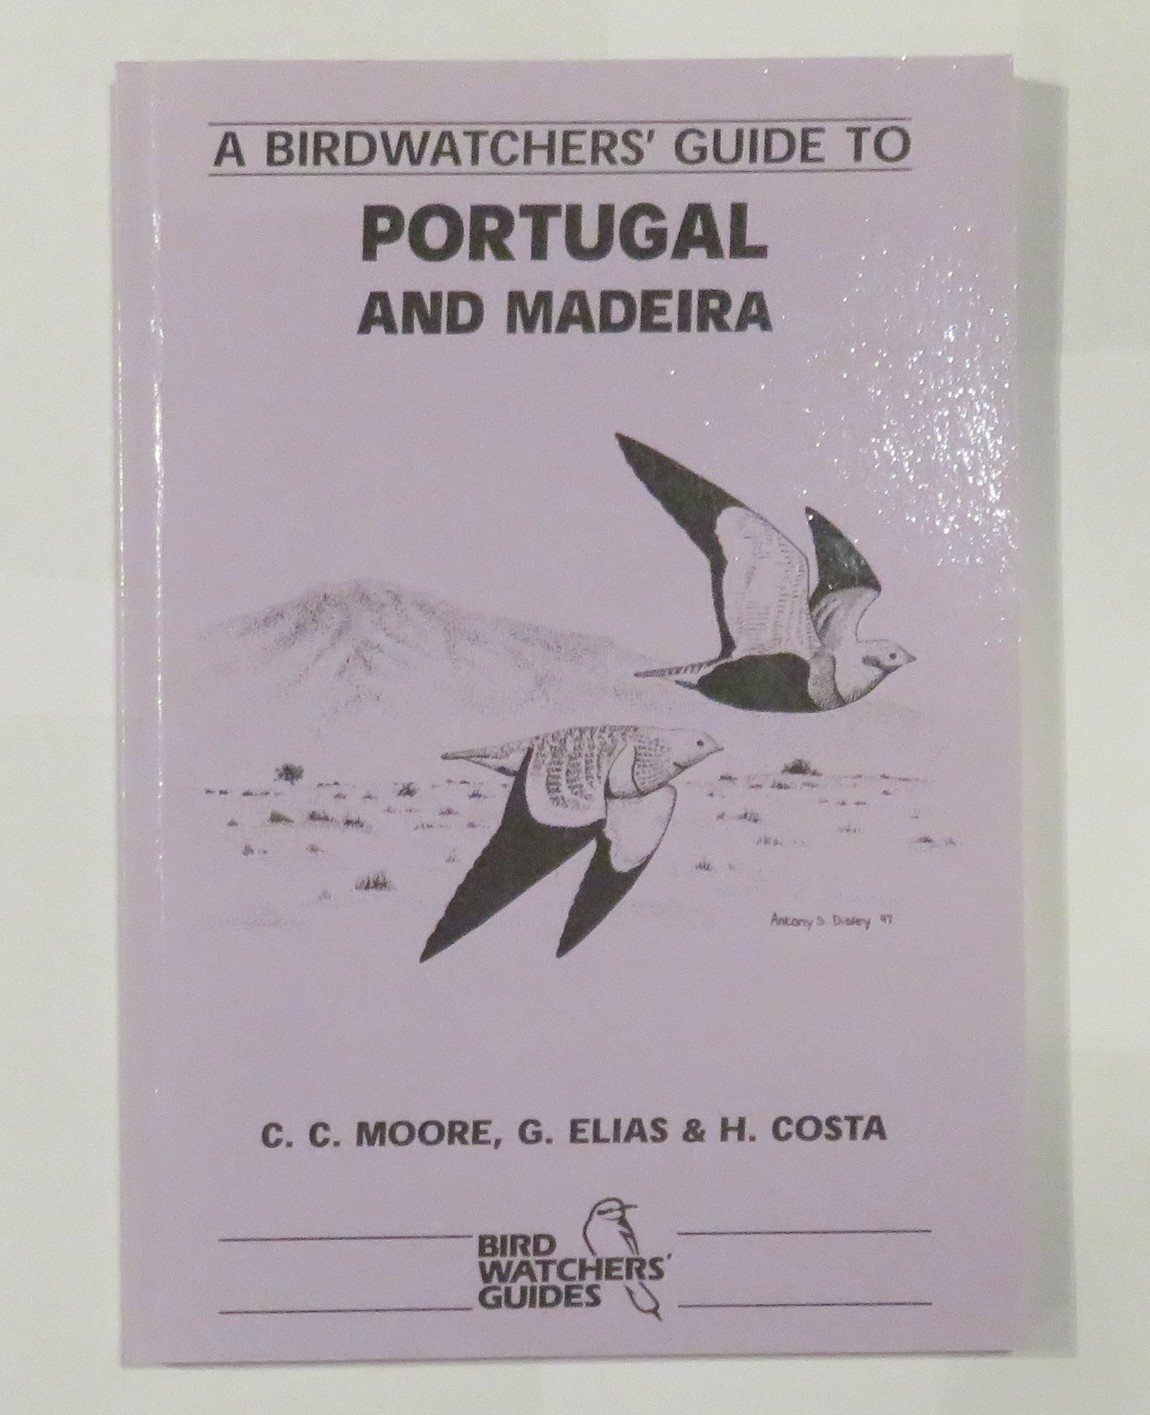 A Birdwatchers' Guide to Portugal and Madeira